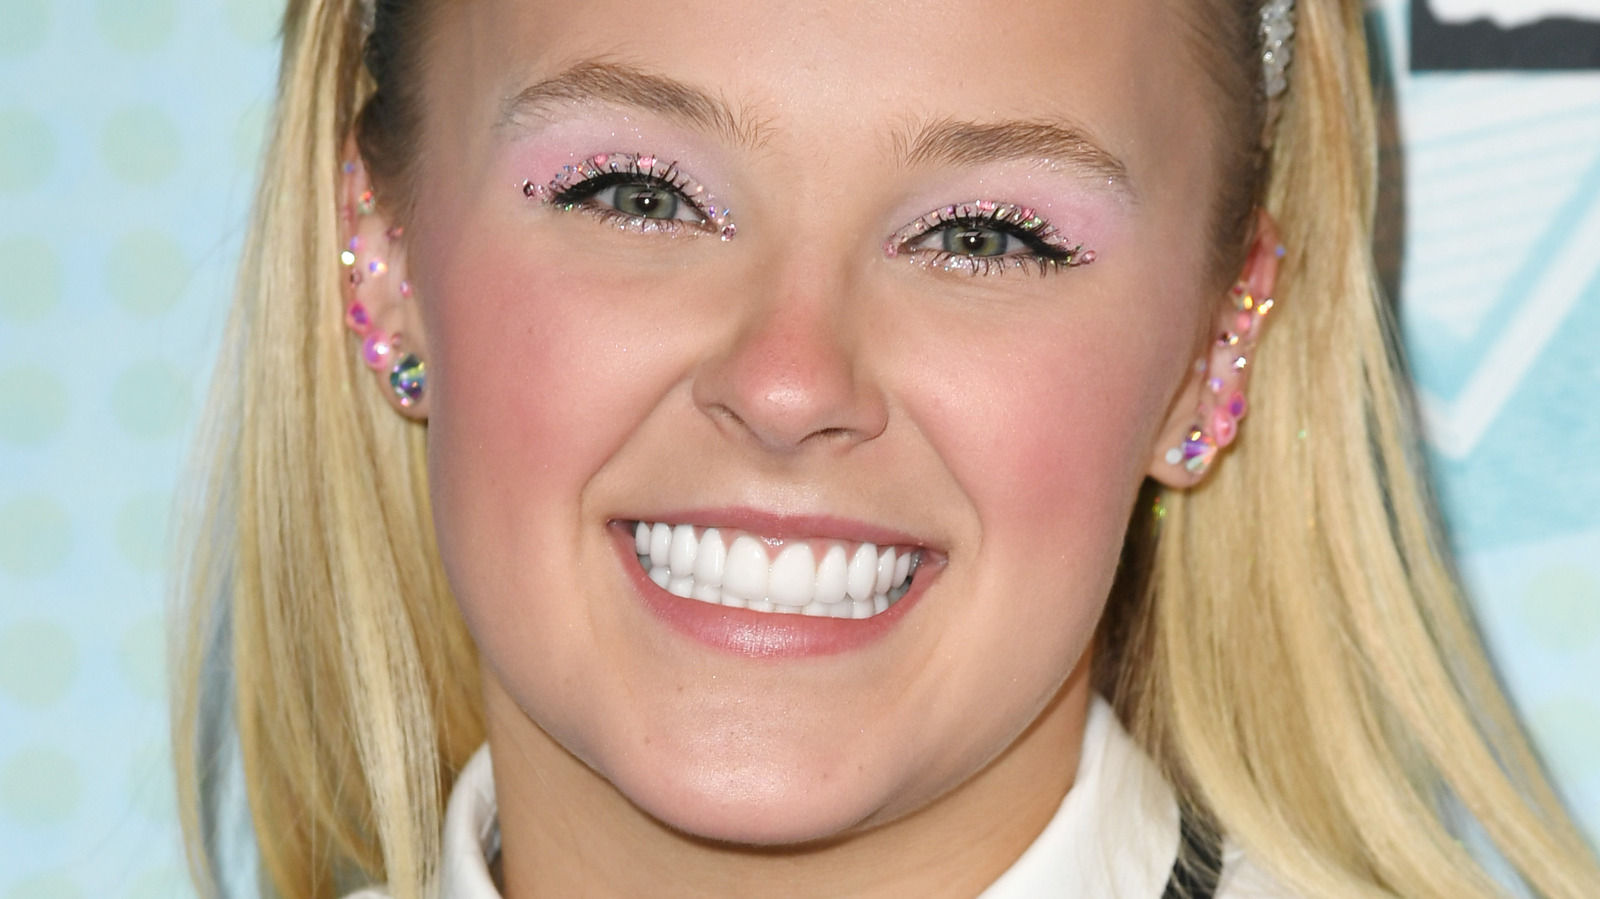 JoJo Siwa's Haircut: Why She Hacked Off Her Iconic Ponytail